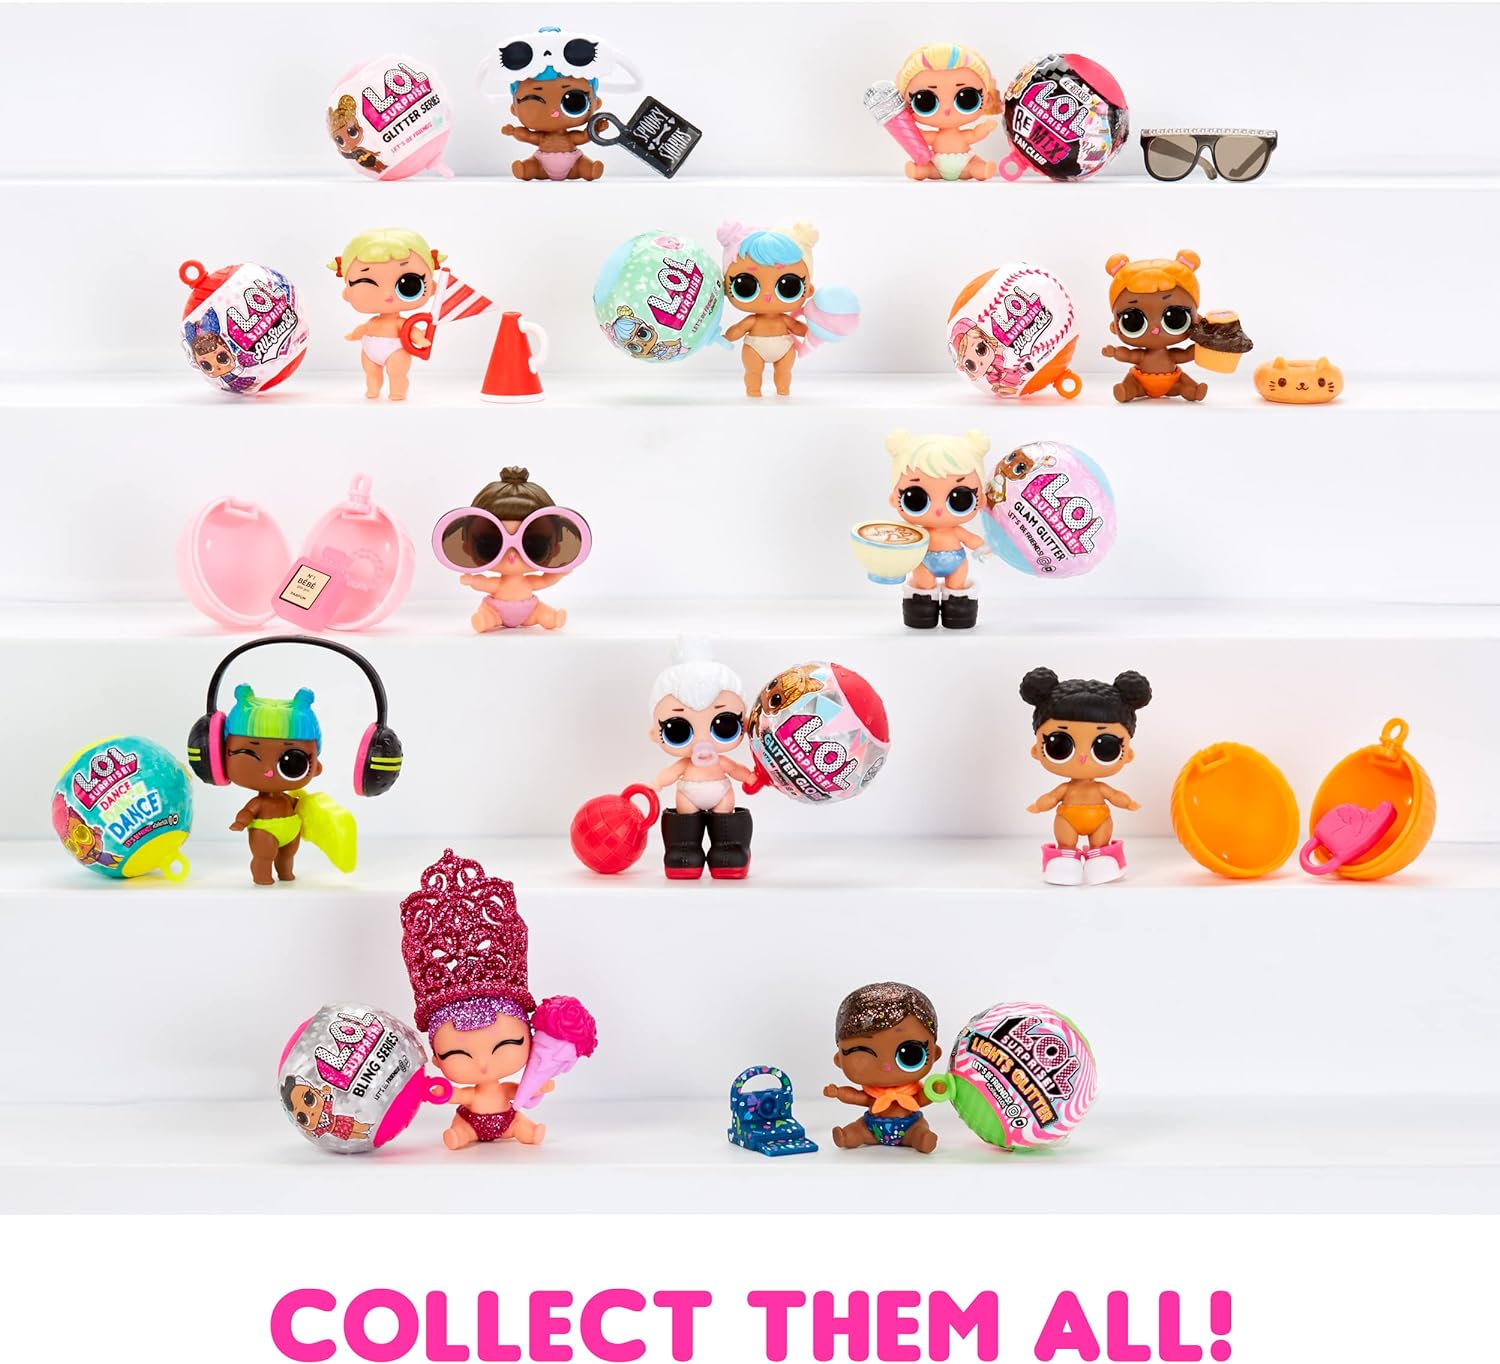 L.O.L. Surprise! Lil Sisters- with Collectible Lil Sister Doll, 5 Surprises, Mini L.O.L. Surprise! Ball, Limited Edition Dolls- Great Gift for Girls Age 4+